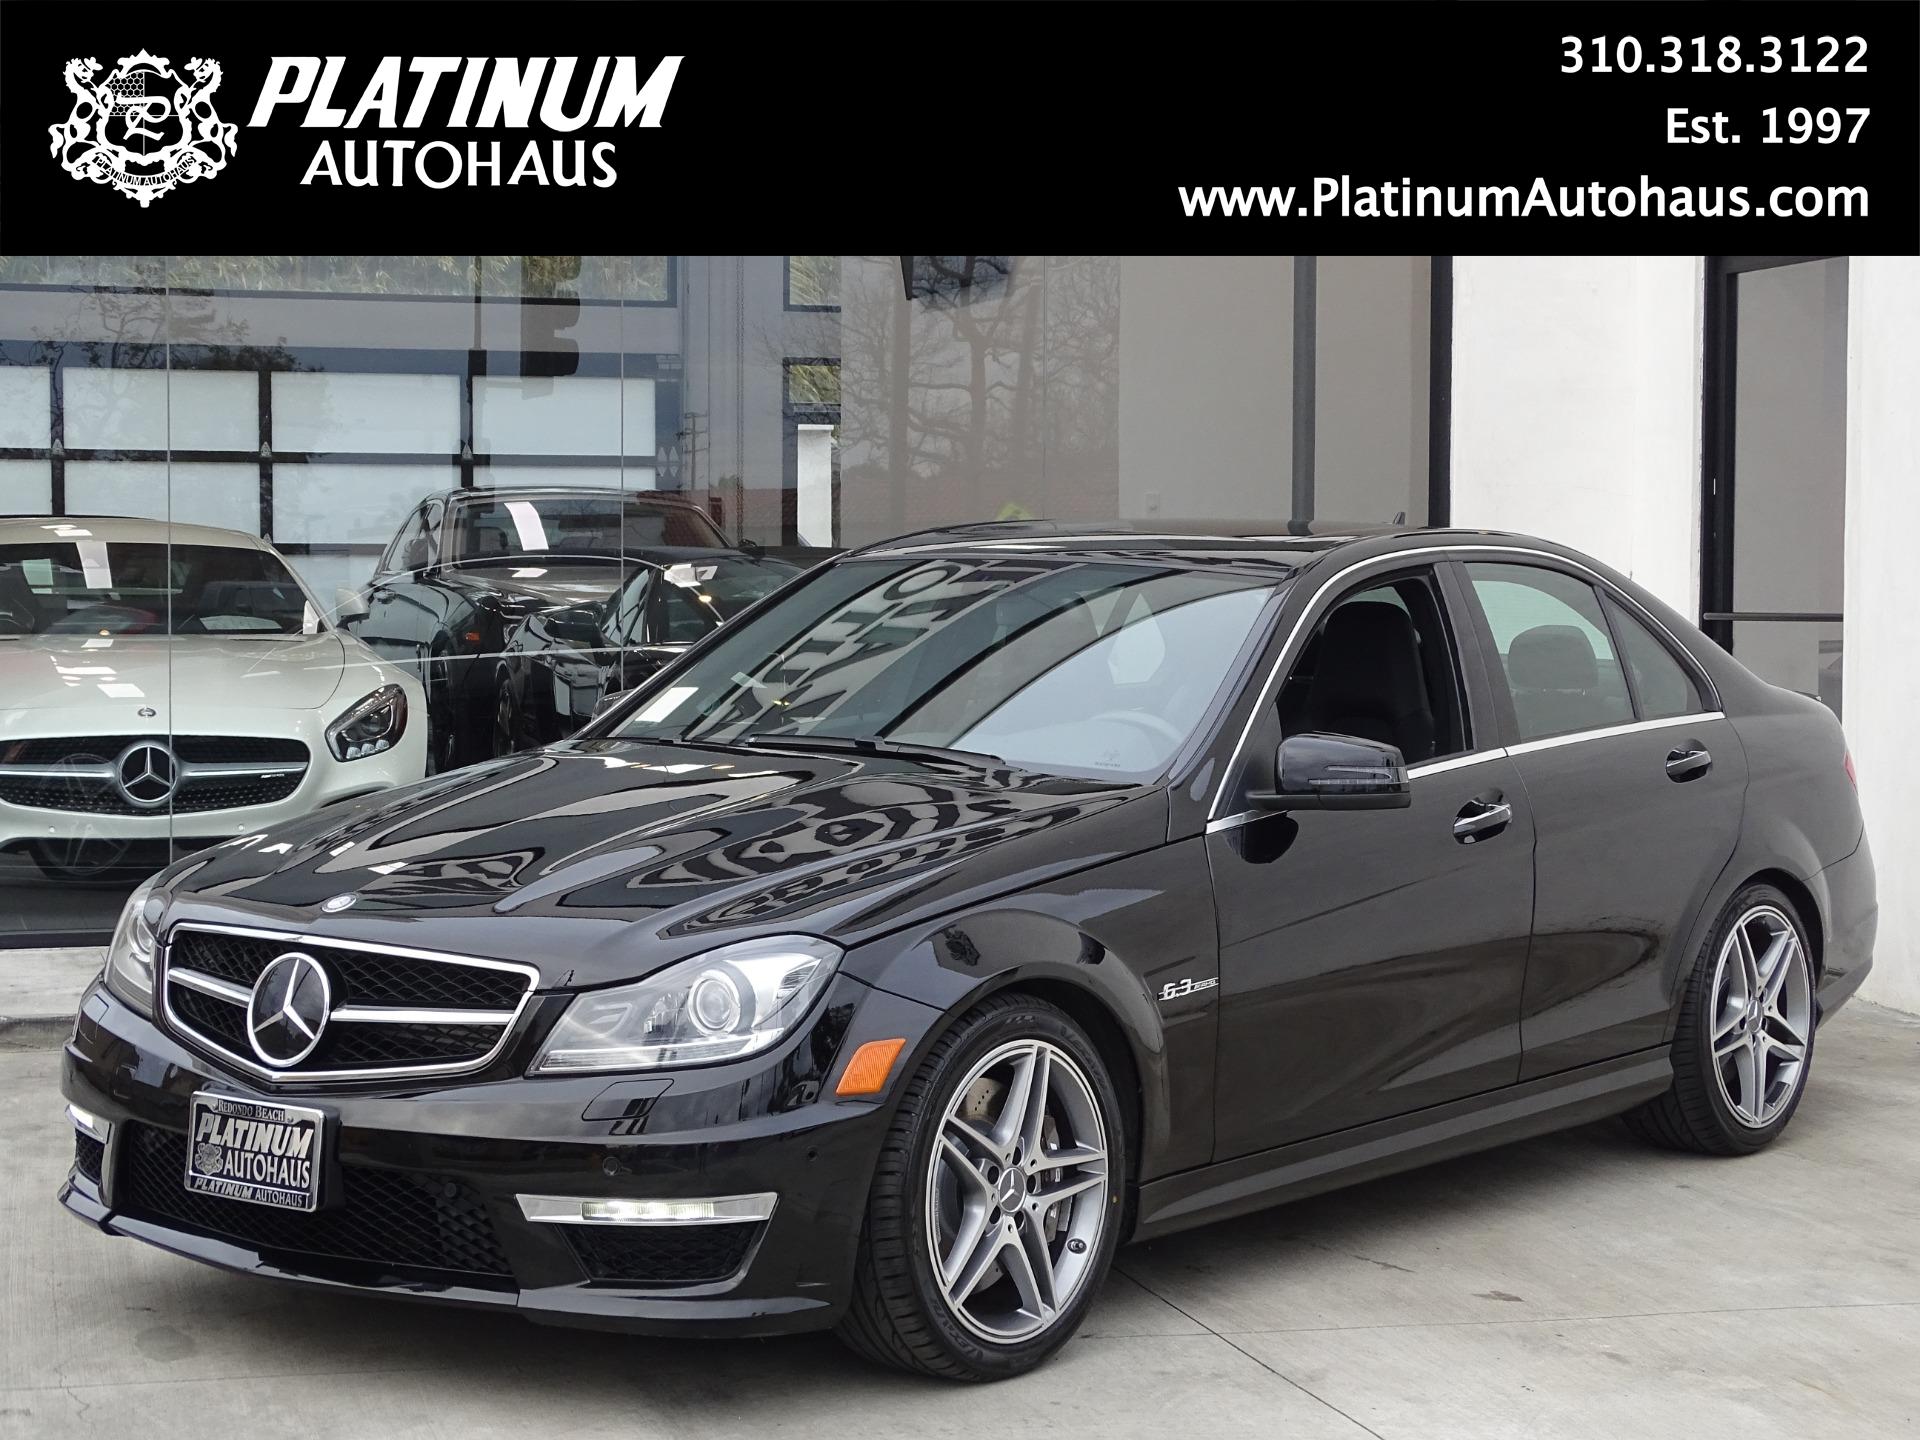 2014 Mercedes Benz C Class C63 Amg Stock 6430 For Sale